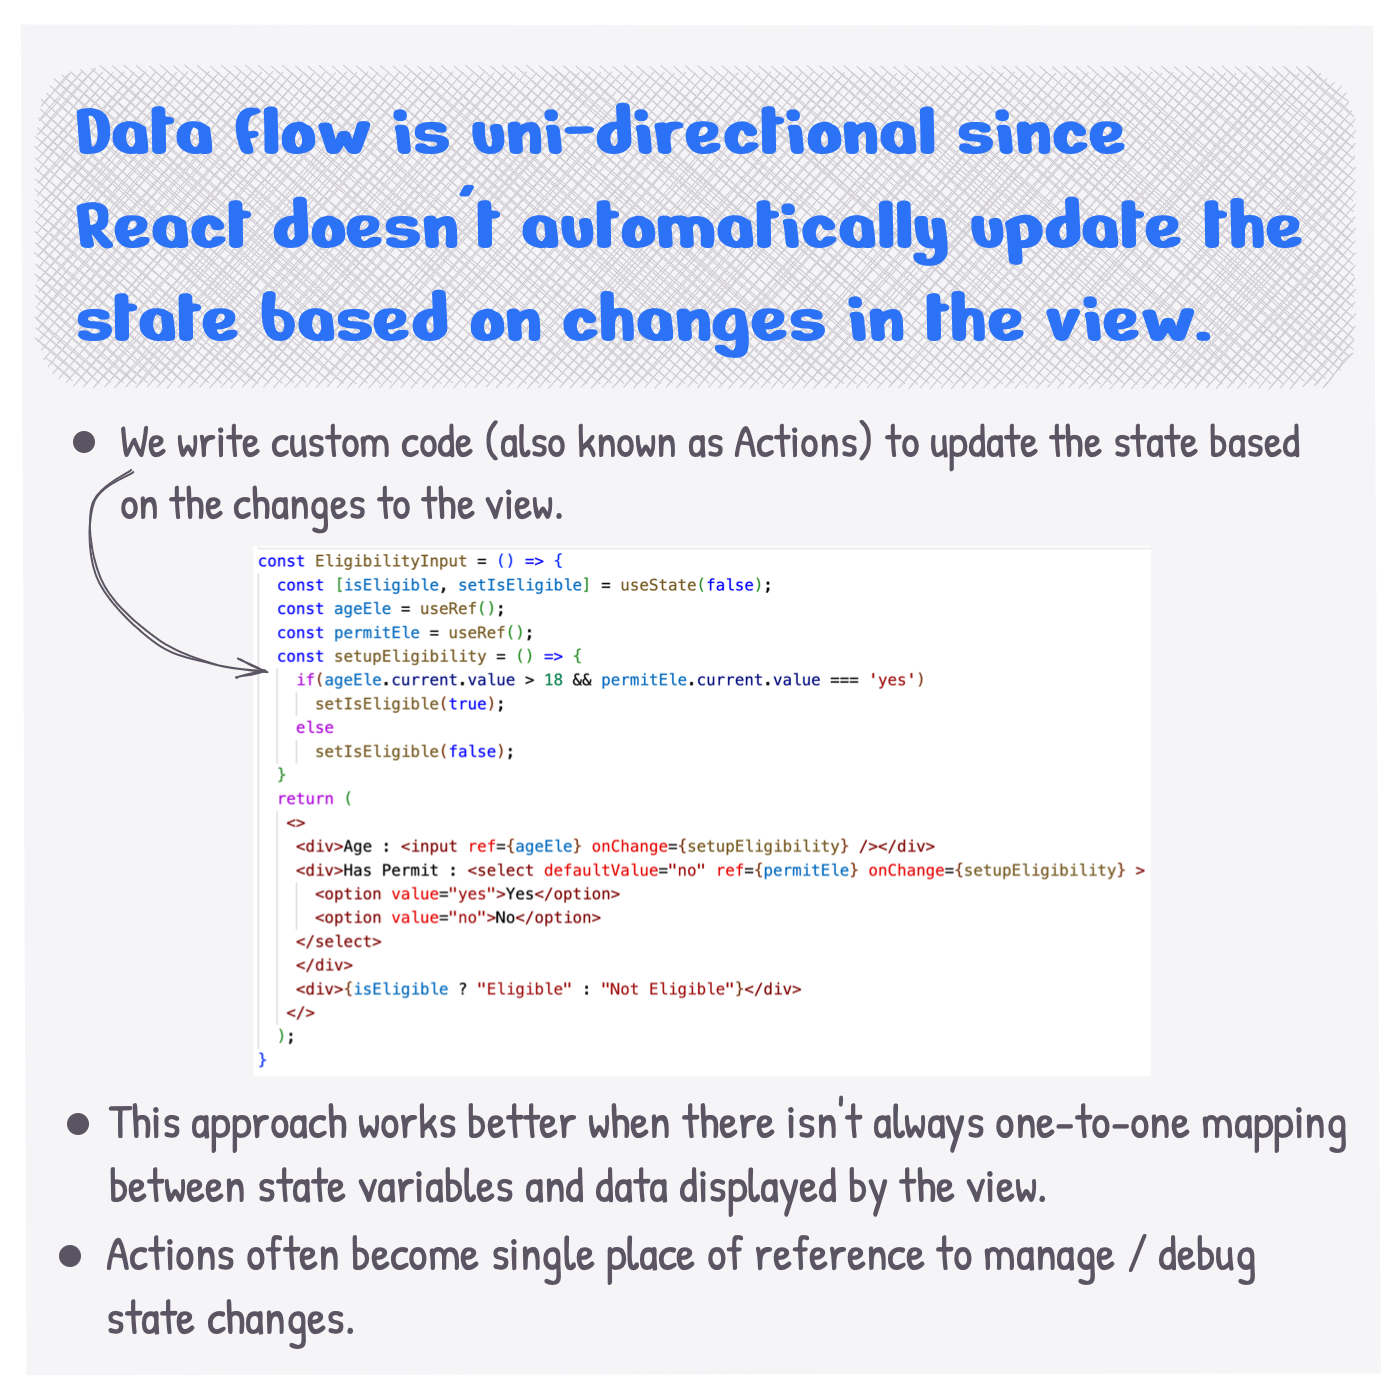 What does it mean when we say 'Data flow uni-directional in React'?